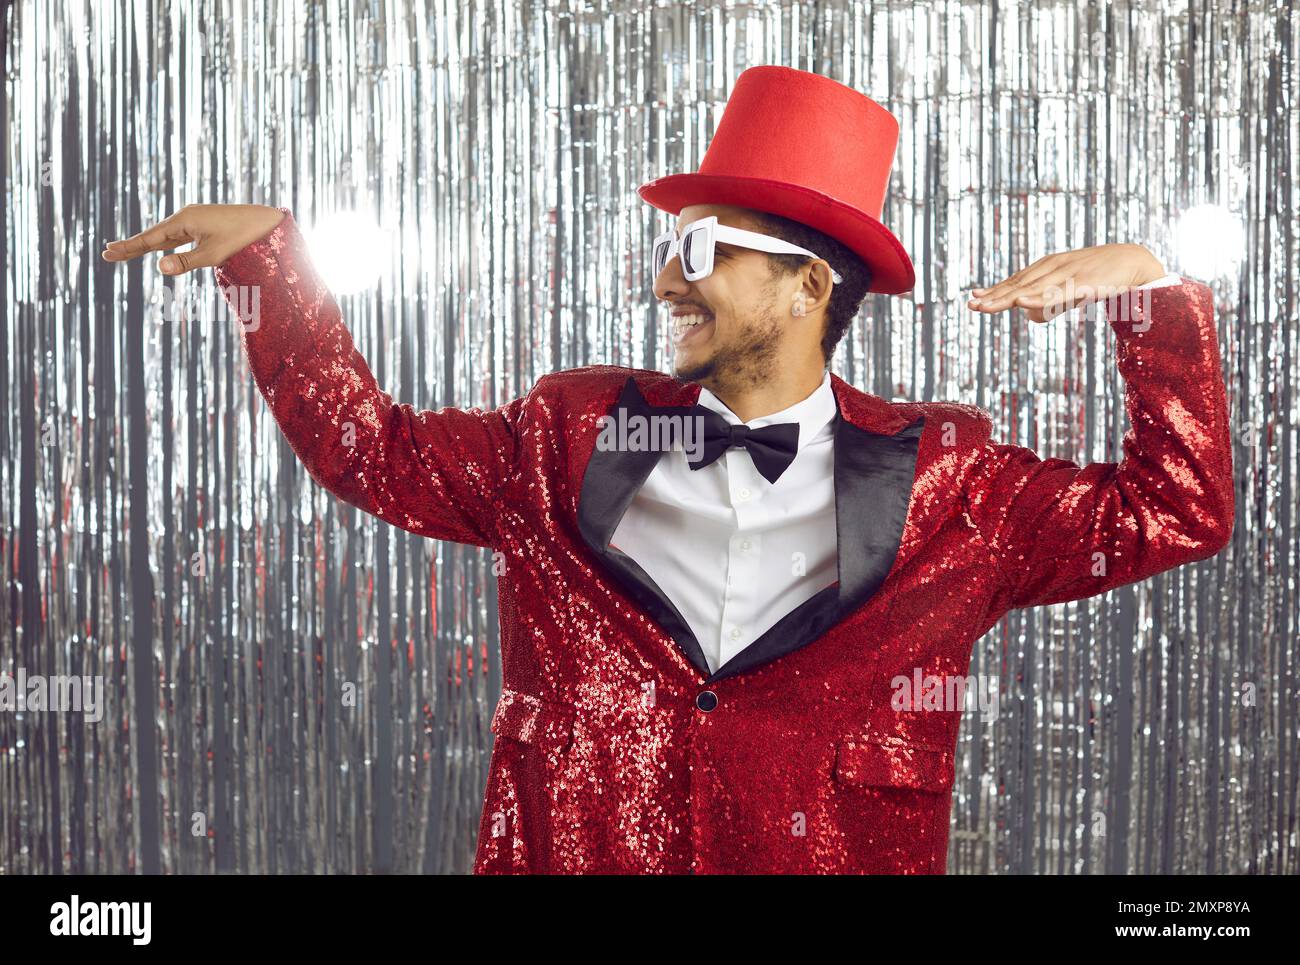 Smiling black male entertainer in festive costume dancing Stock Photo